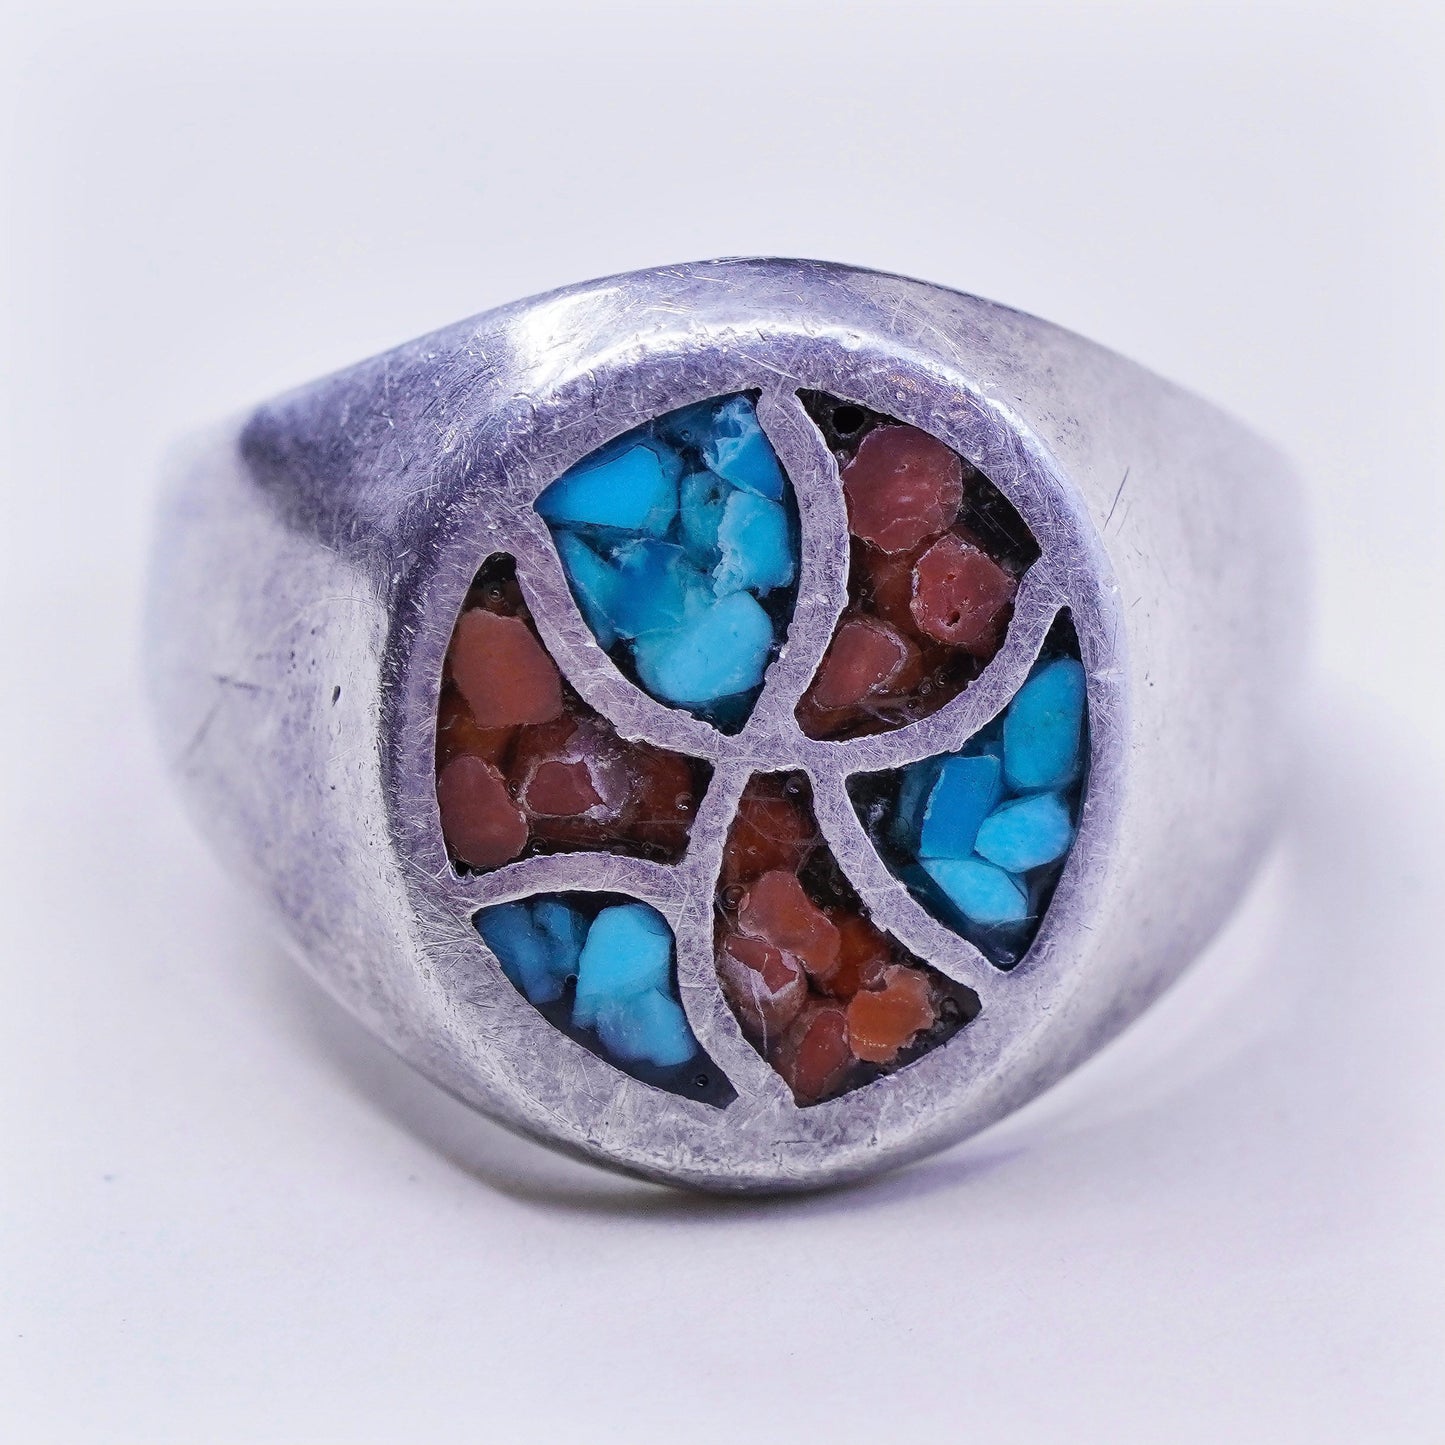 Size 11.5, natives American Sterling silver handmade ring w/ turquoise N coral